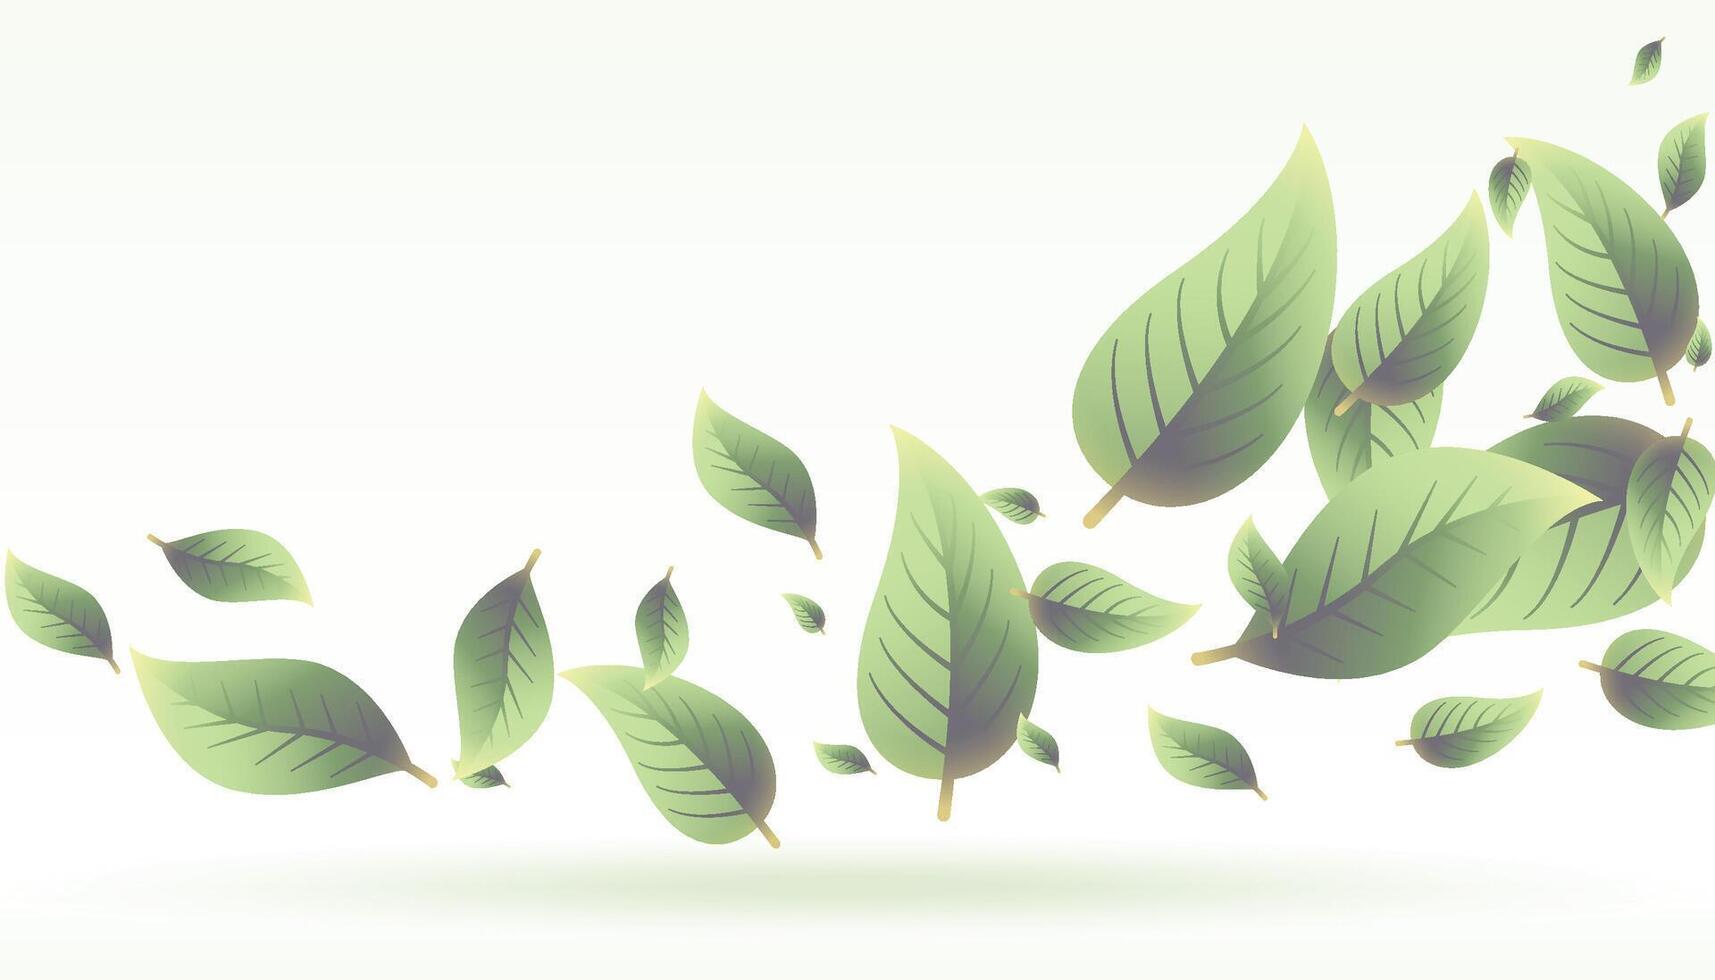 Realistic flying green leaf, blur and focused elements. Nature spring tree, fresh ecology cosmetic background, organic eco forest objects. Spring foliage falling. illustration vector